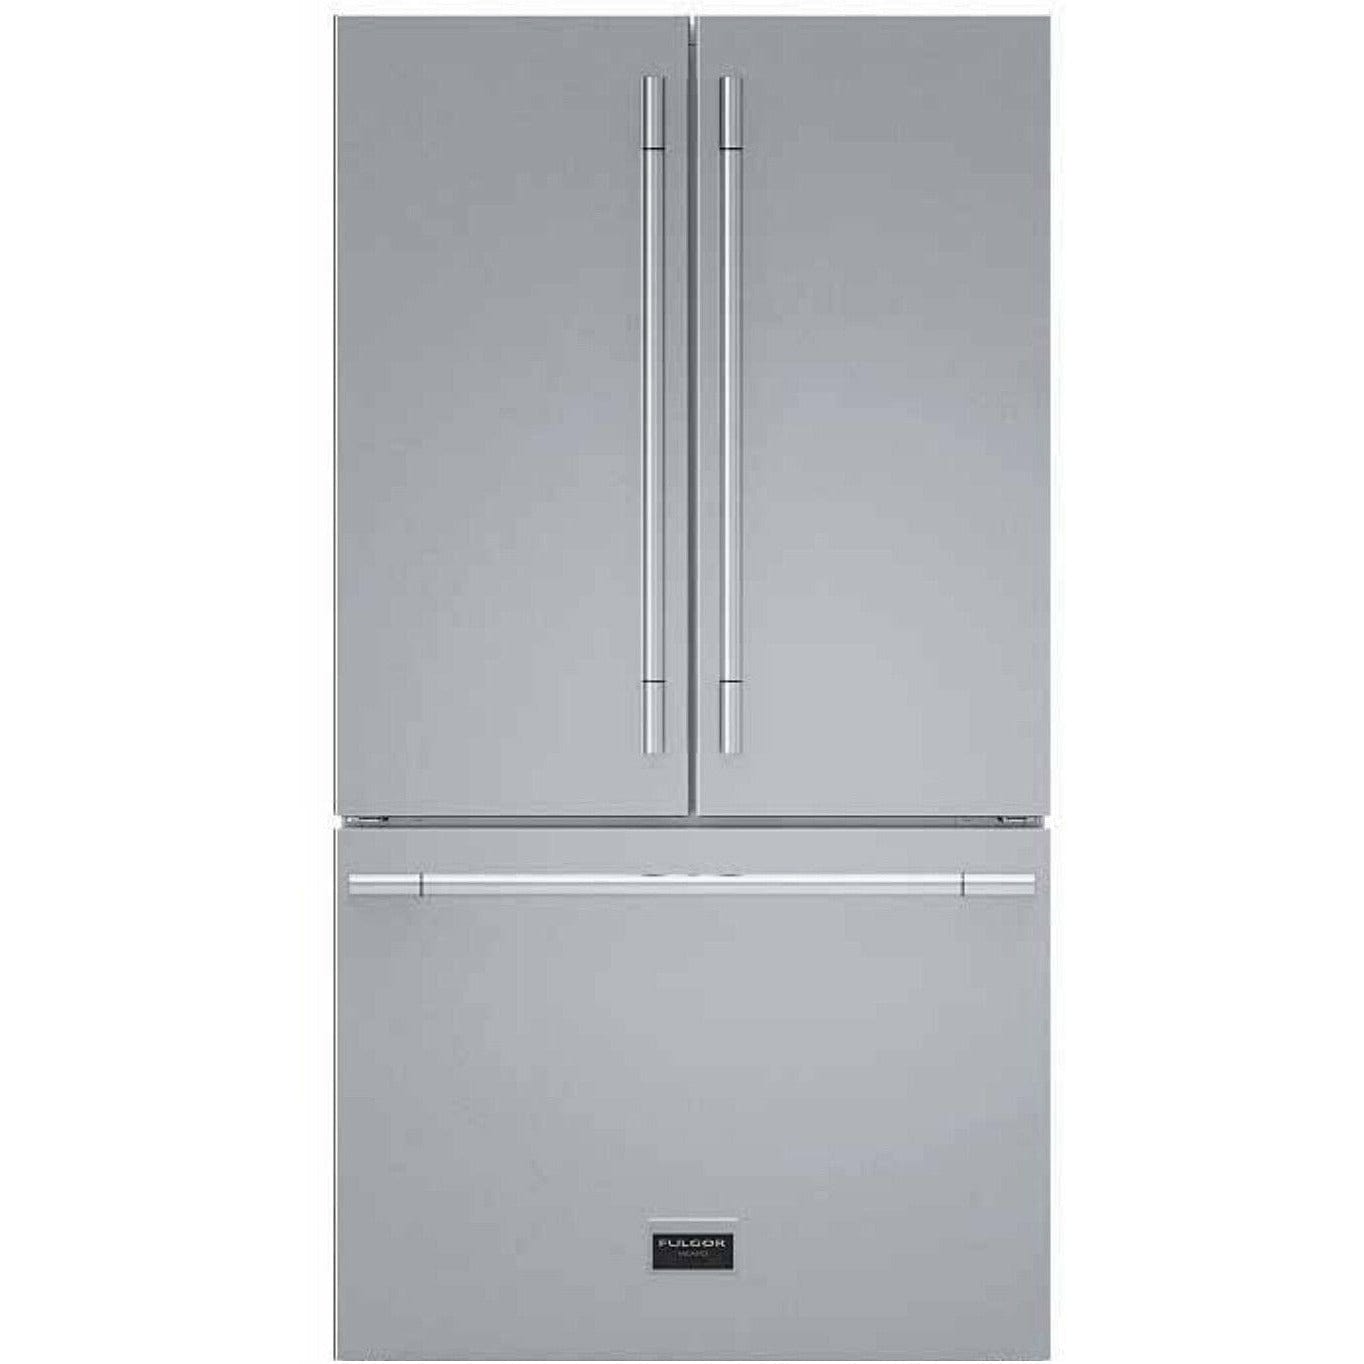 Fulgor Milano Package 36" Induction Pro-Range,  36" French Door Refrigerator, 24" Built-In Dishwasher and  36" Under Cabinet Range Hood Ranges F6PIR365S1F6FBM36S2 Luxury Appliances Direct